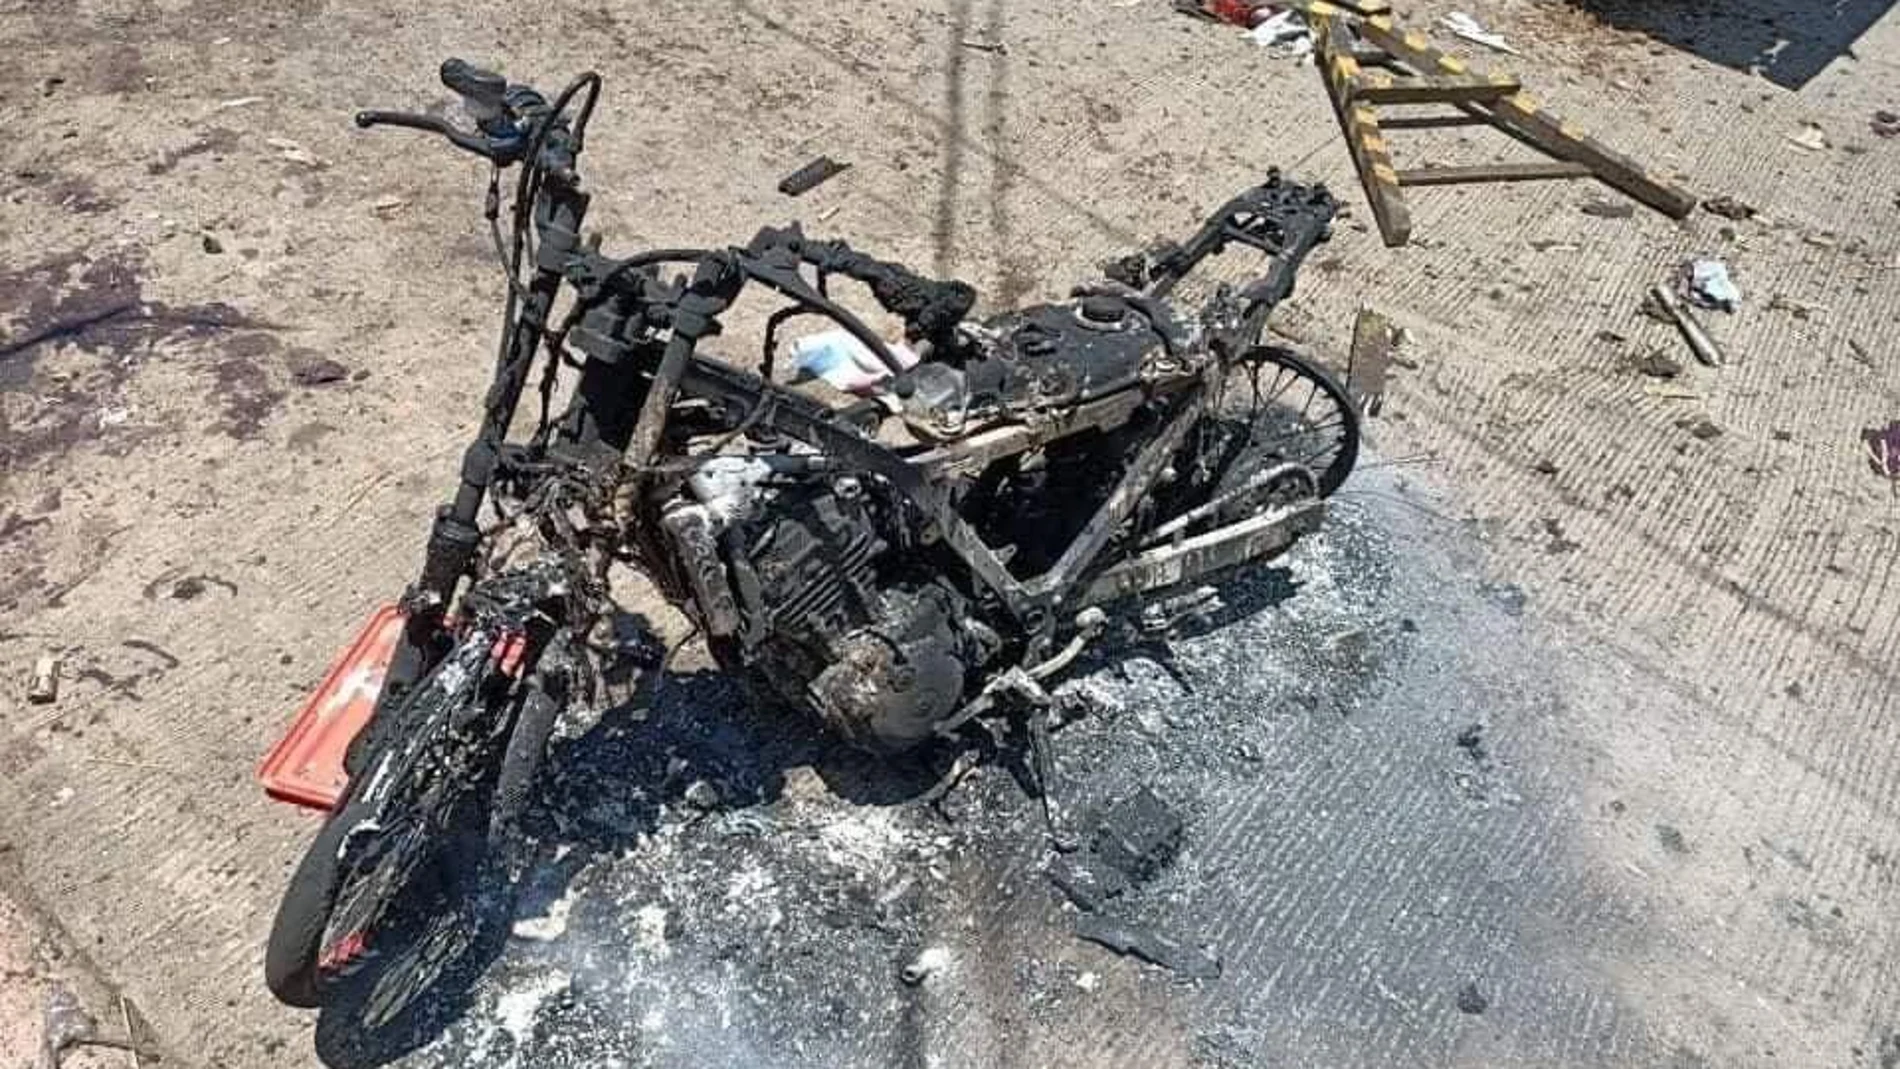 Burned motorcycle is pictured in the aftermath of an explosion in Jolo Island